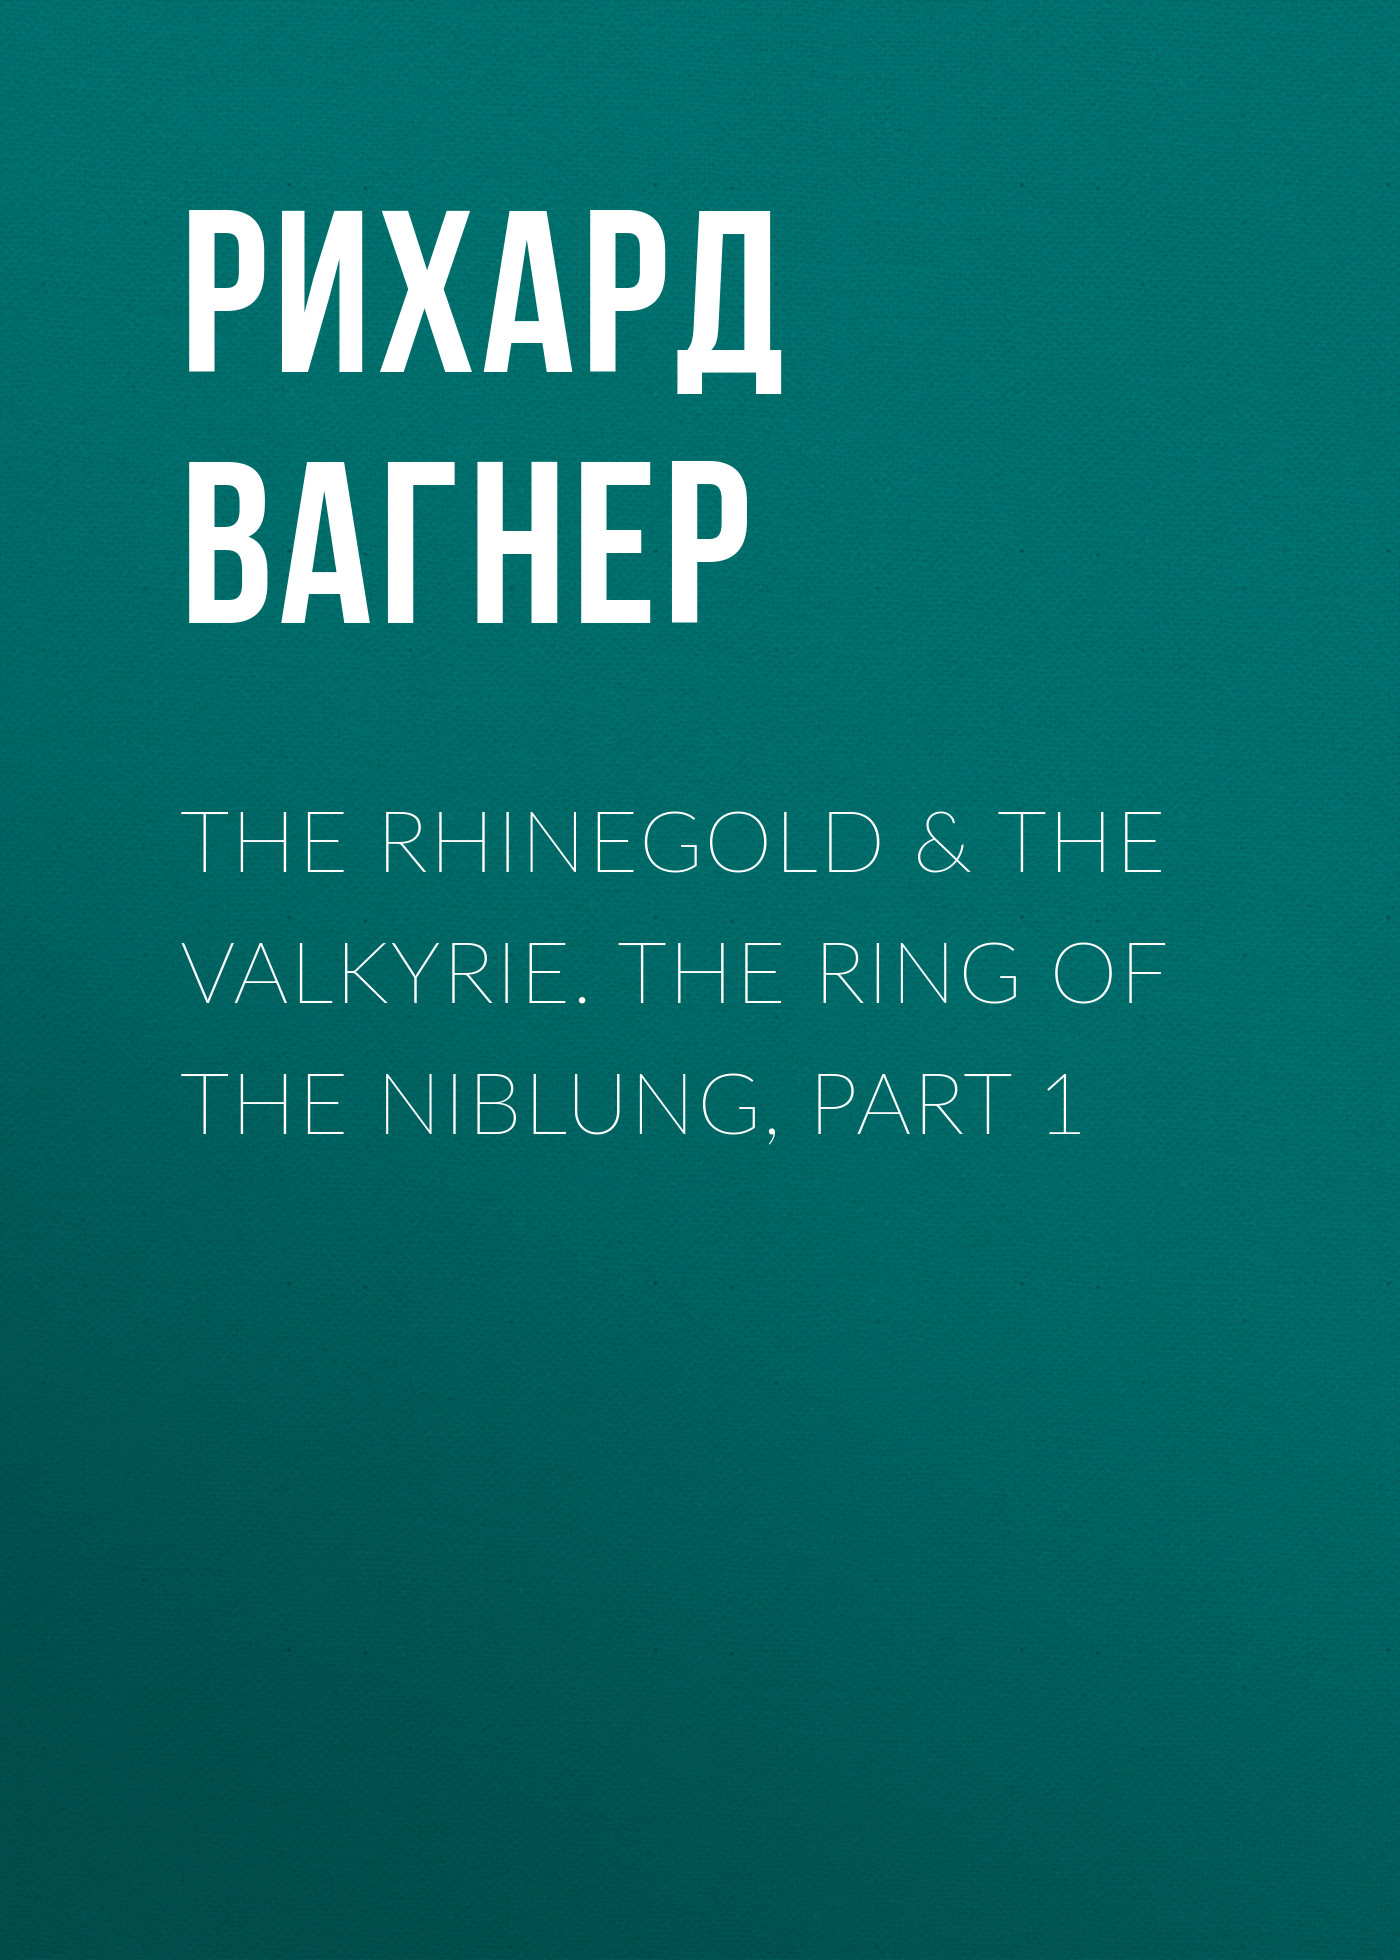 The Rhinegold&The Valkyrie. The Ring of the Niblung, part 1